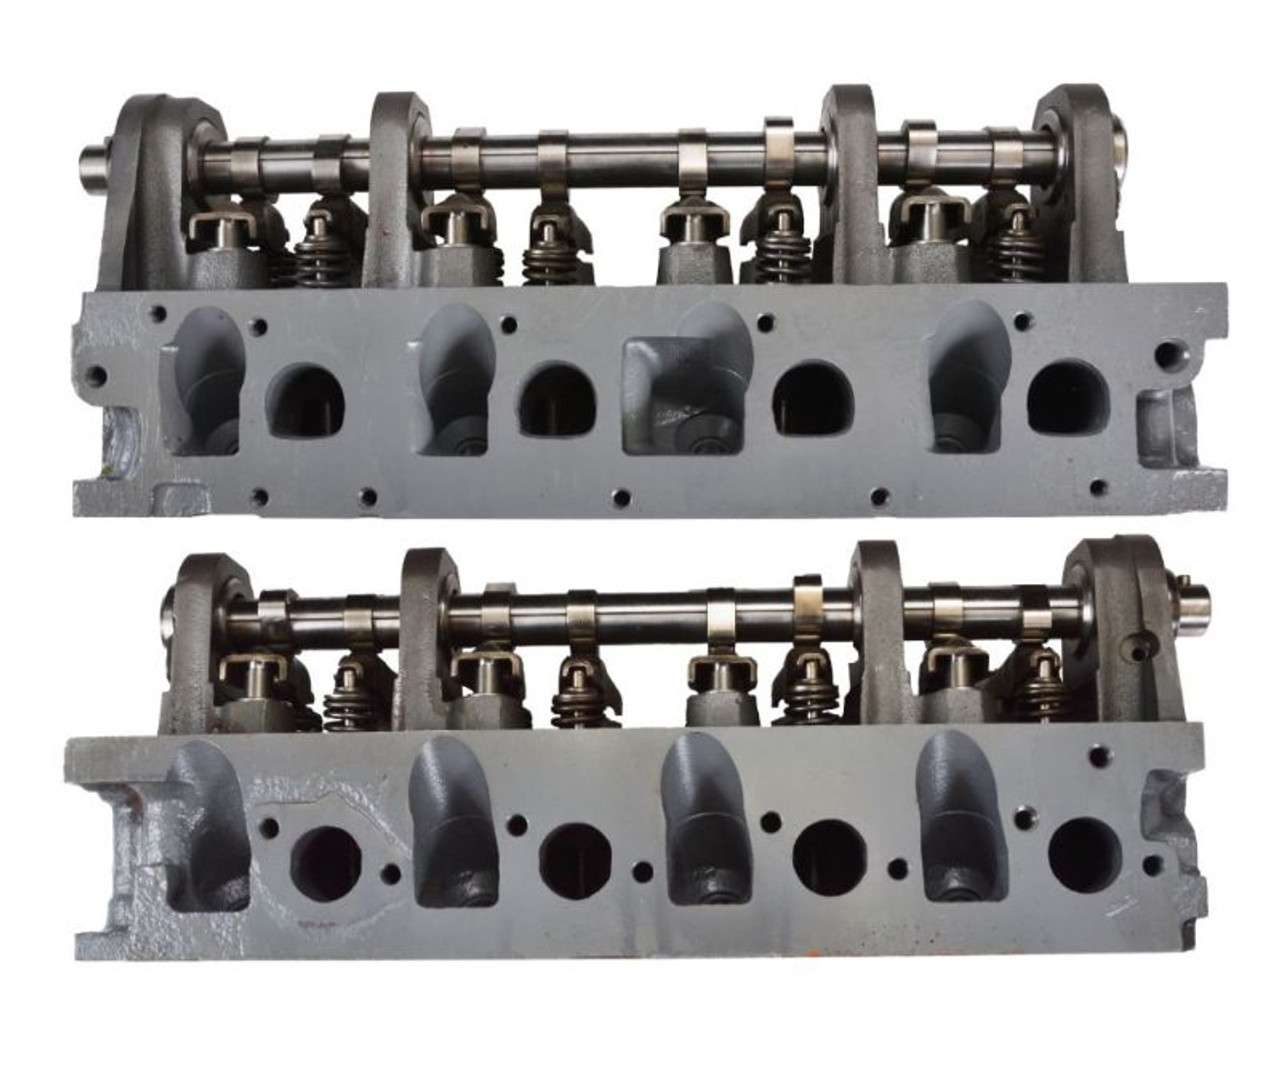 1996 Ford Ranger 2.3L Engine Cylinder Head Assembly CH1019R -2